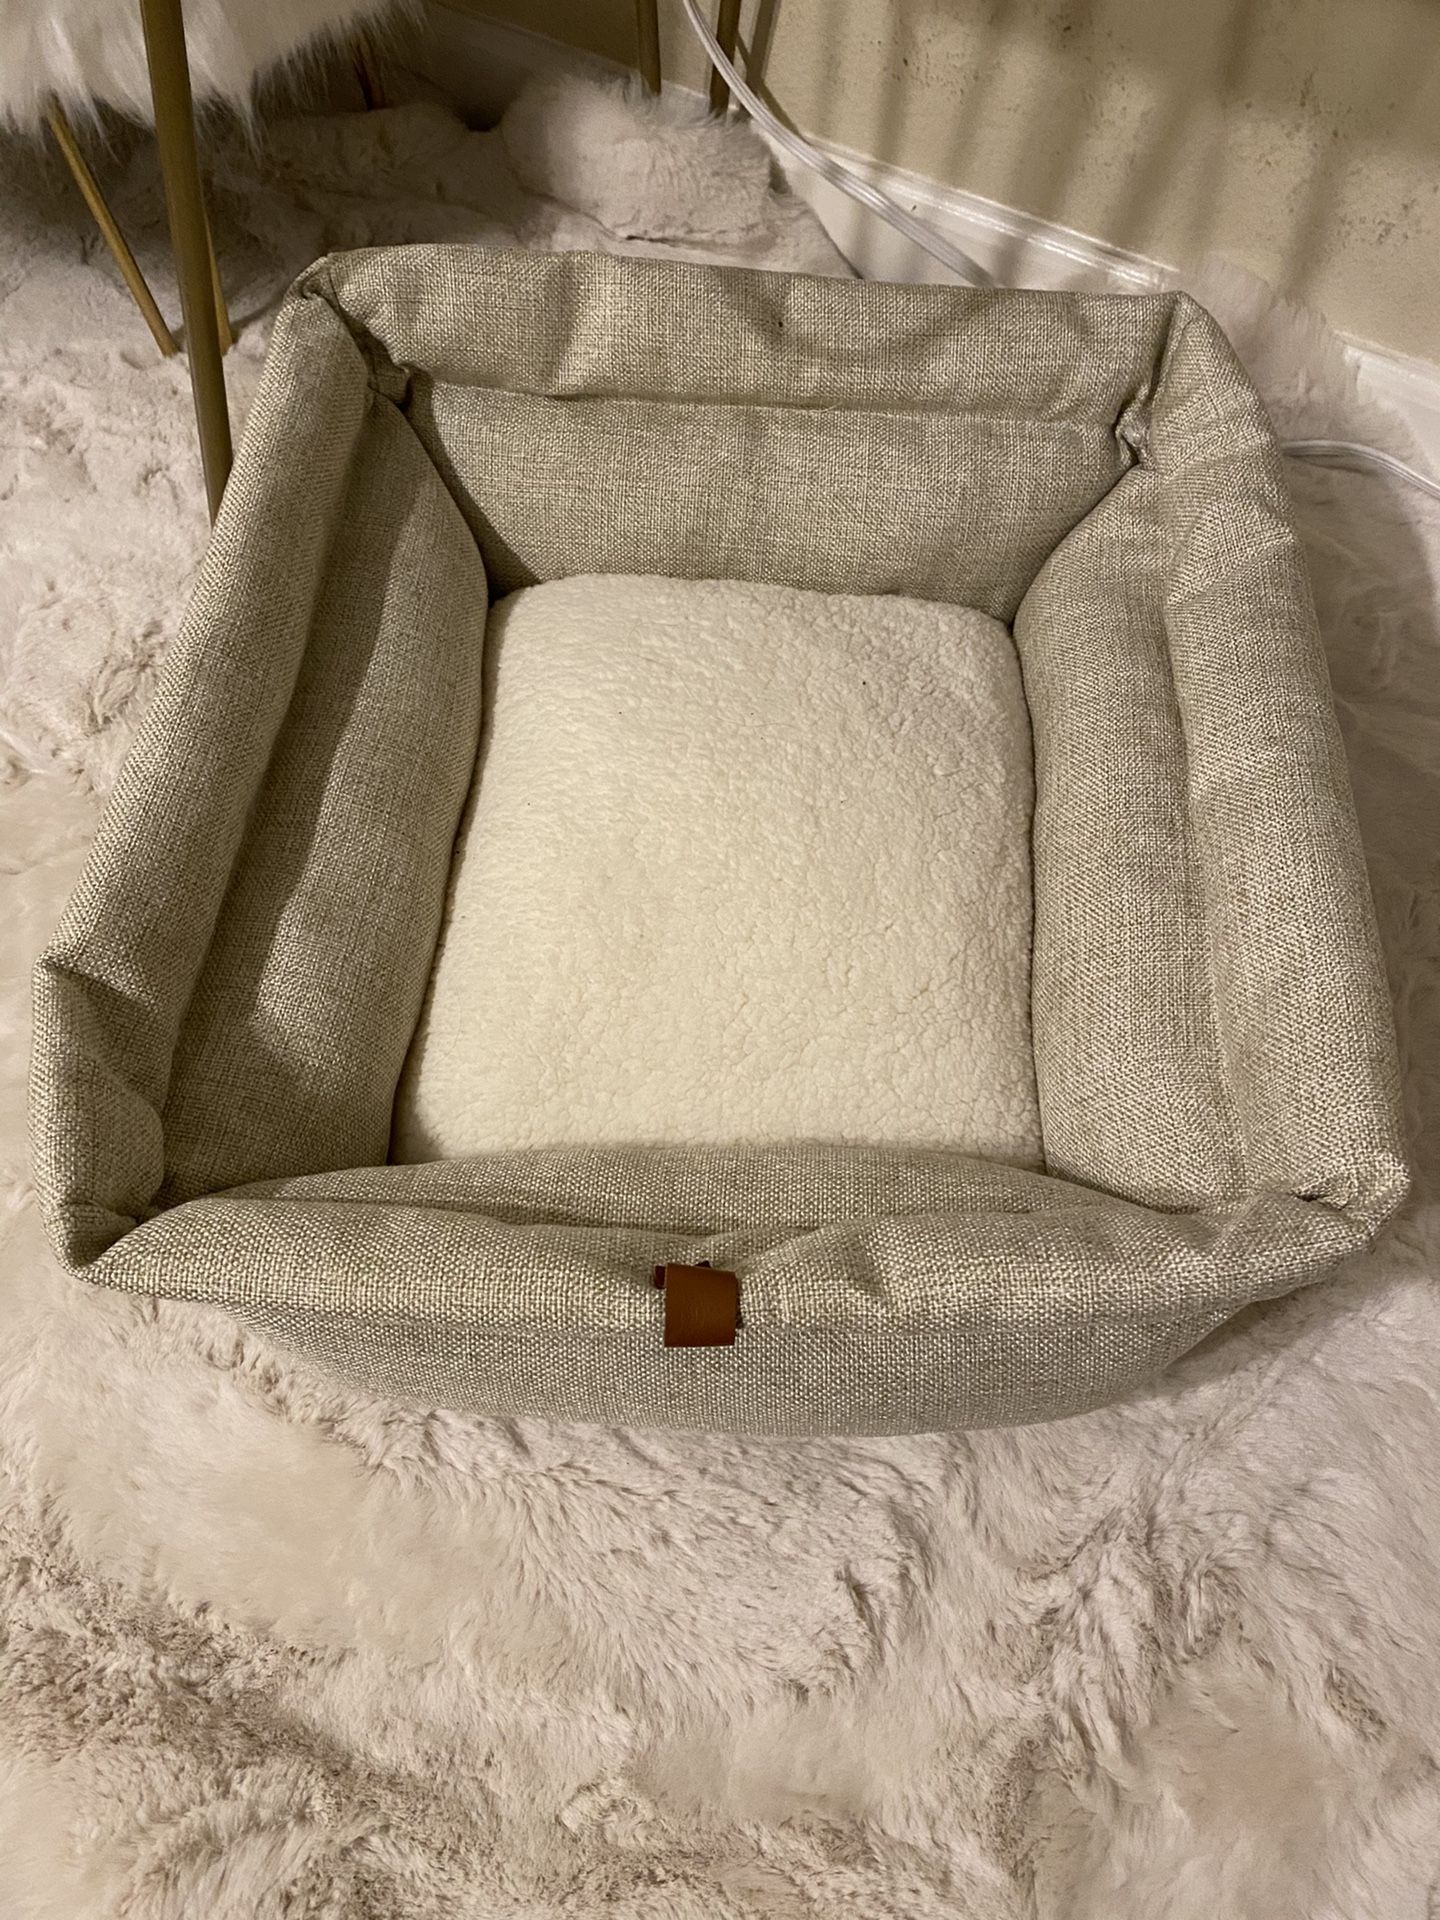 Small dog or cat bed